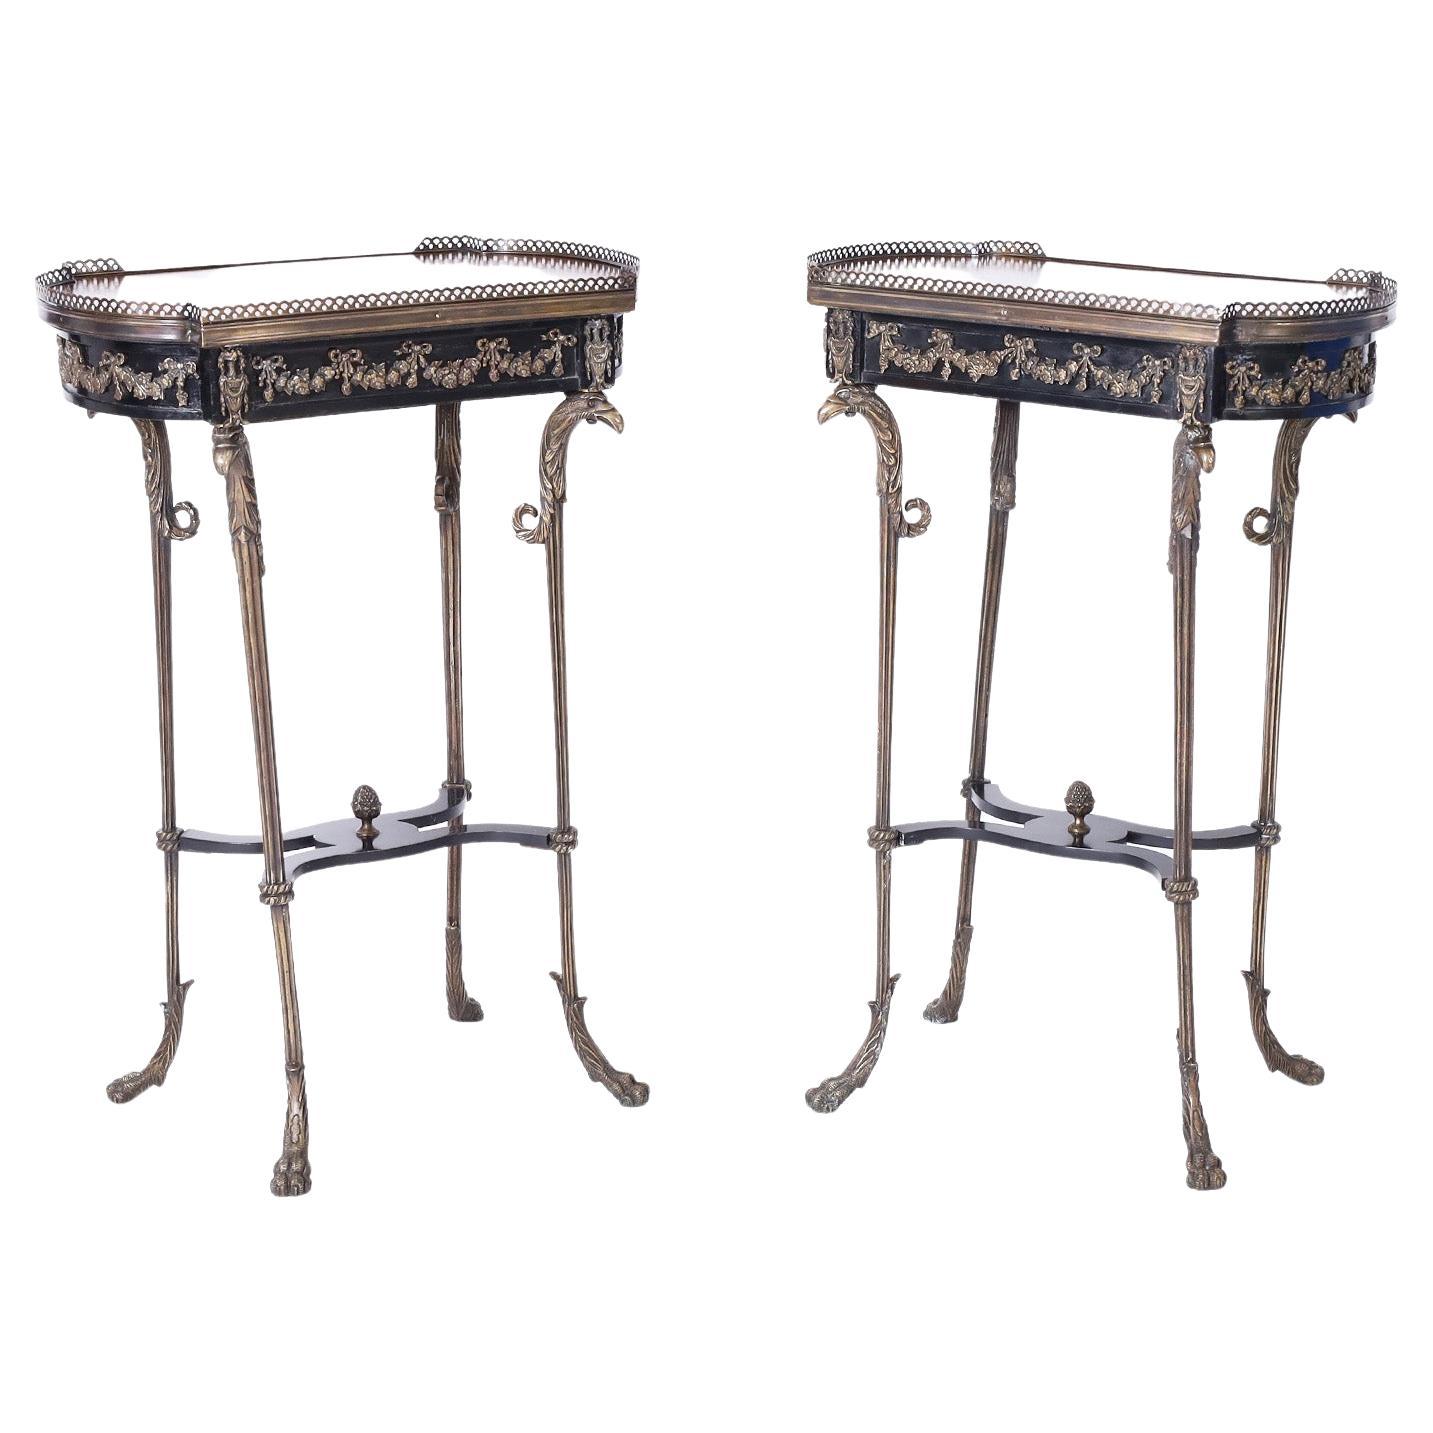 Rare and remarkable 19th century French stands with classical inlaid designs in mahogany, walnut, satinwood, and kingwood on the tops, with brass galleries over an ebonized case with ormolu. The brass bases have bird heads on long elegant legs